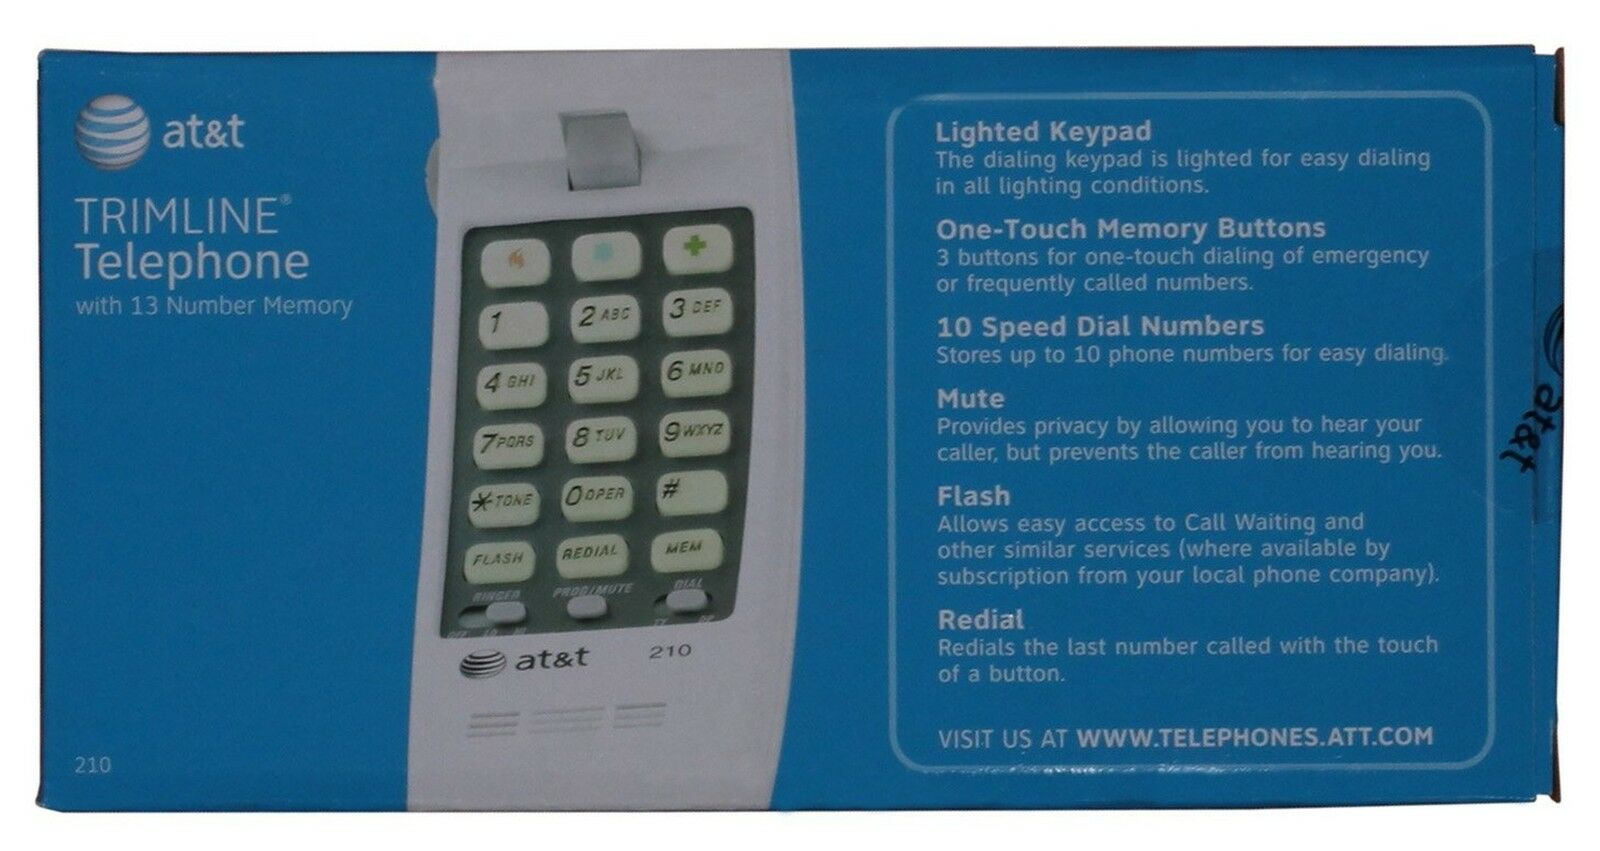 AT&T 210M Corded Phone Desk Wall Mount Trimline Telephone Handset White New - image 2 of 3